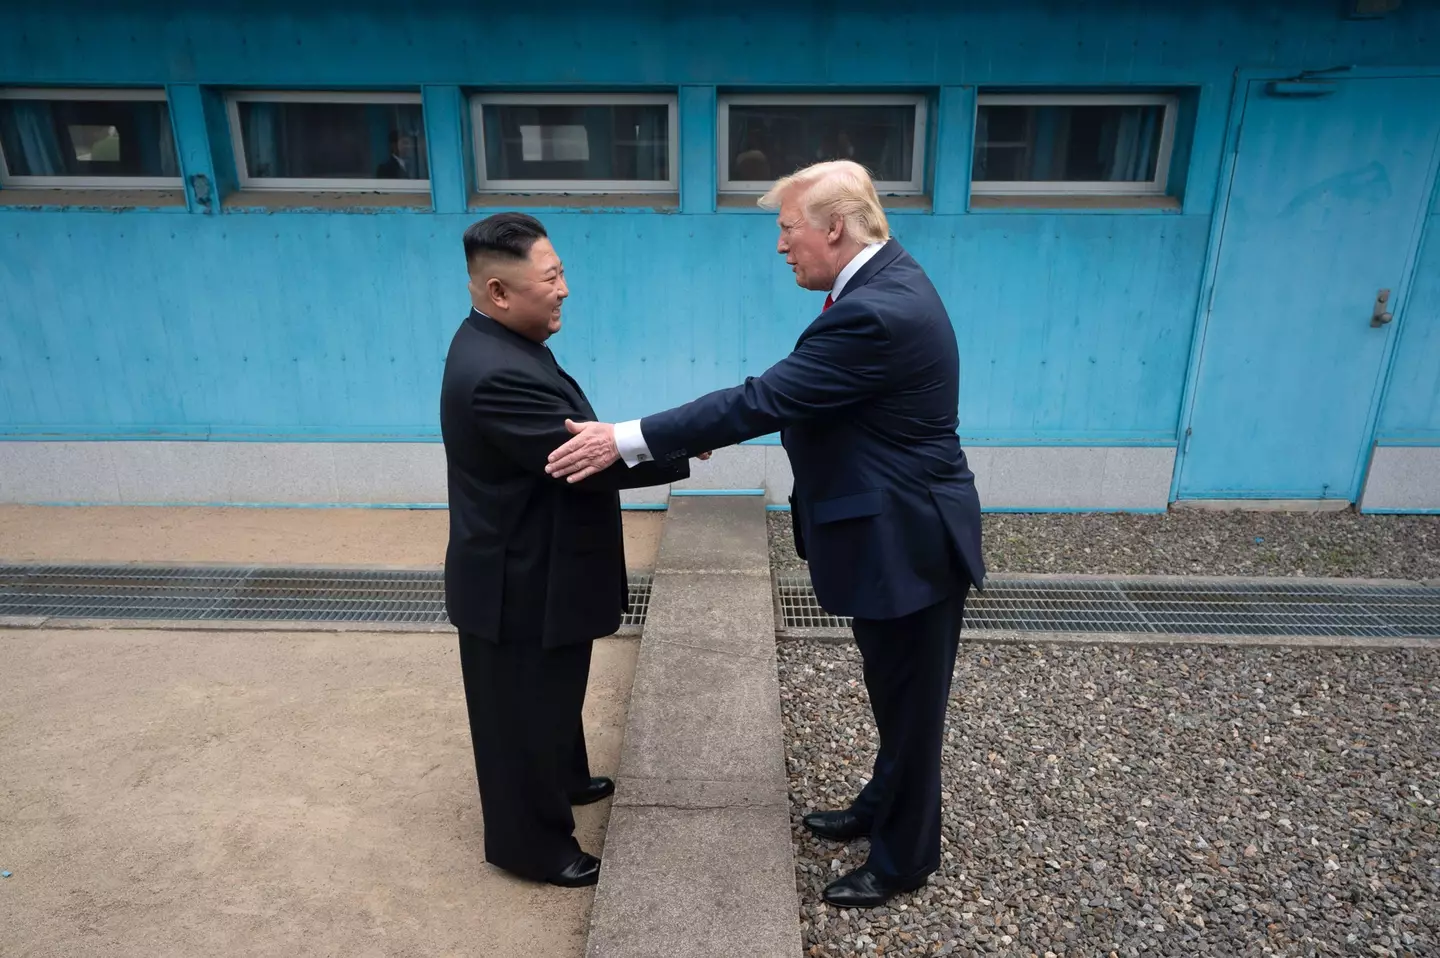 Trump said he had a 'special friendship' with Kim.